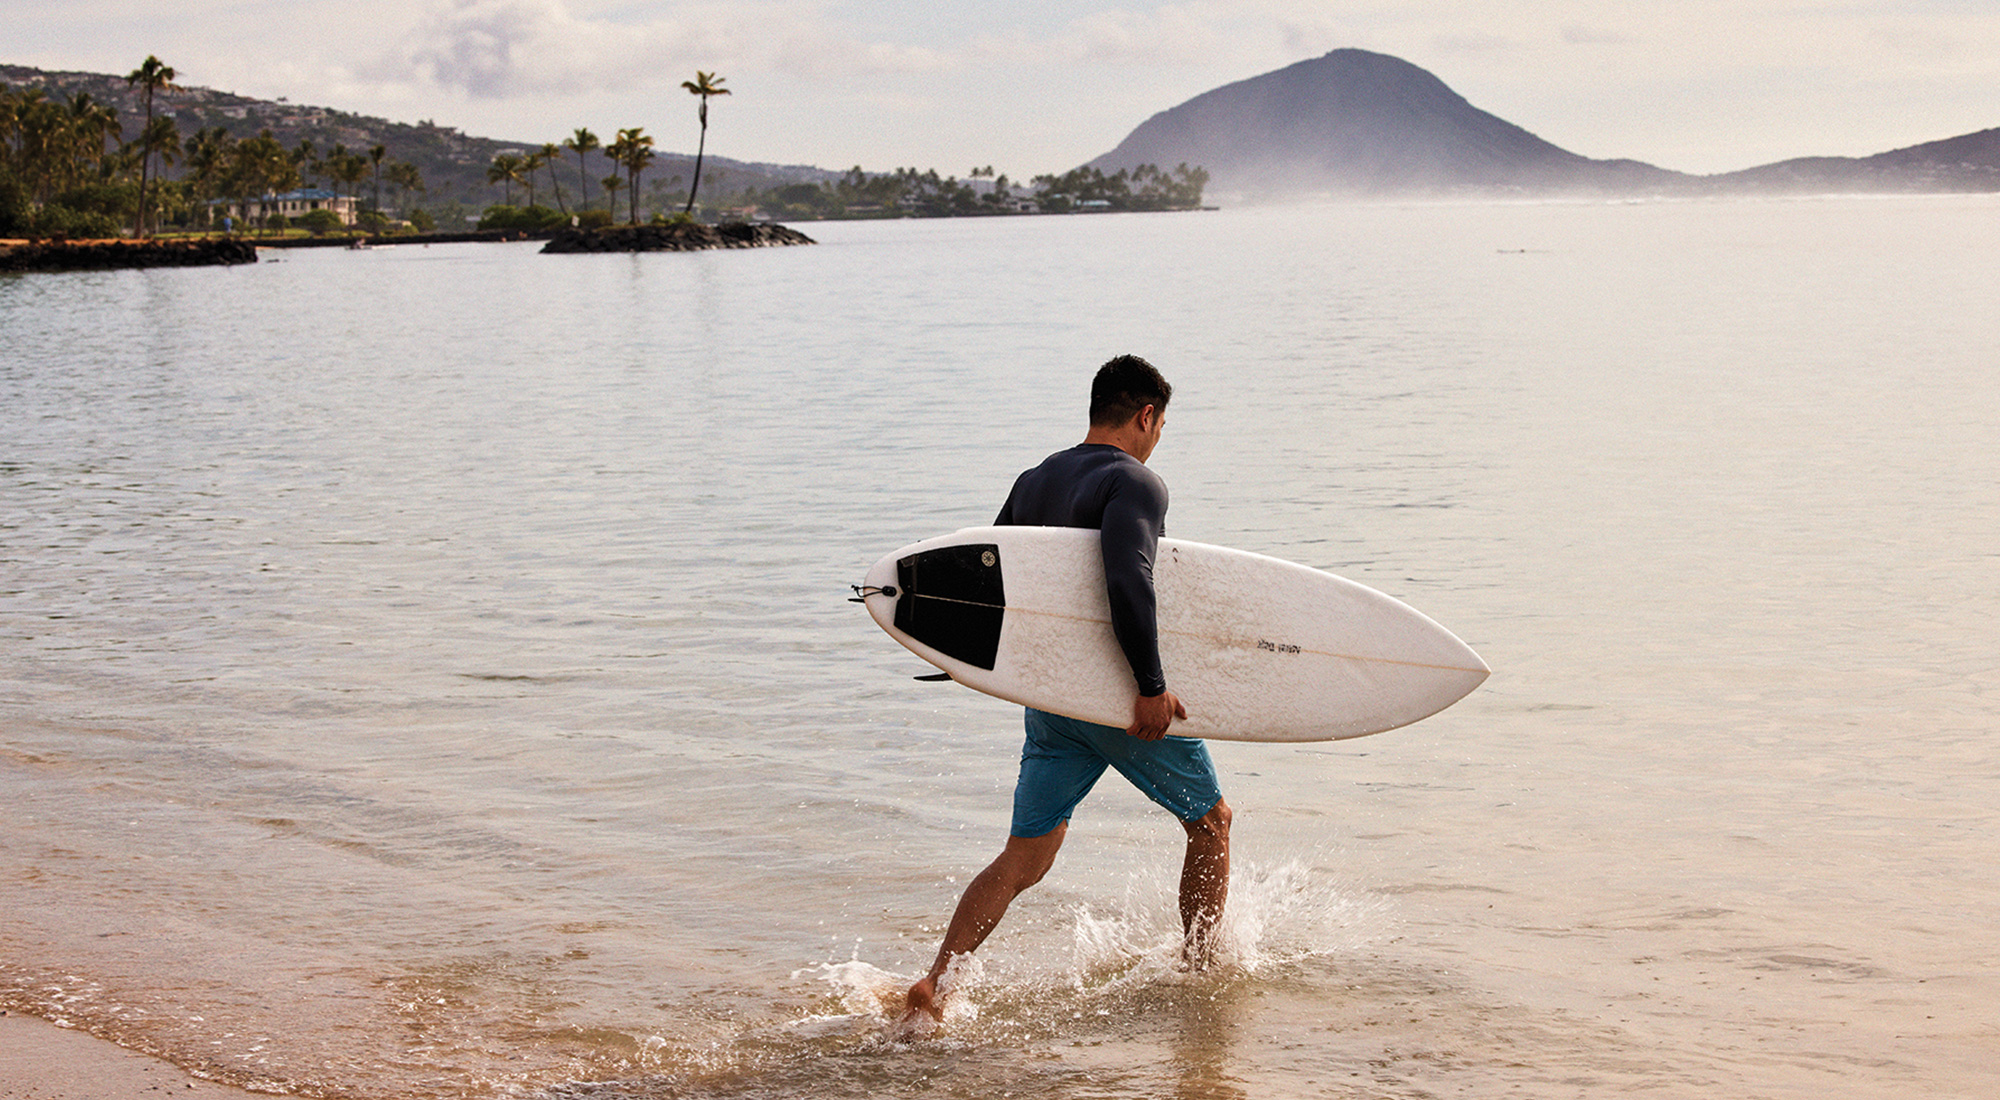 Surfer with surfboard walking into beach water